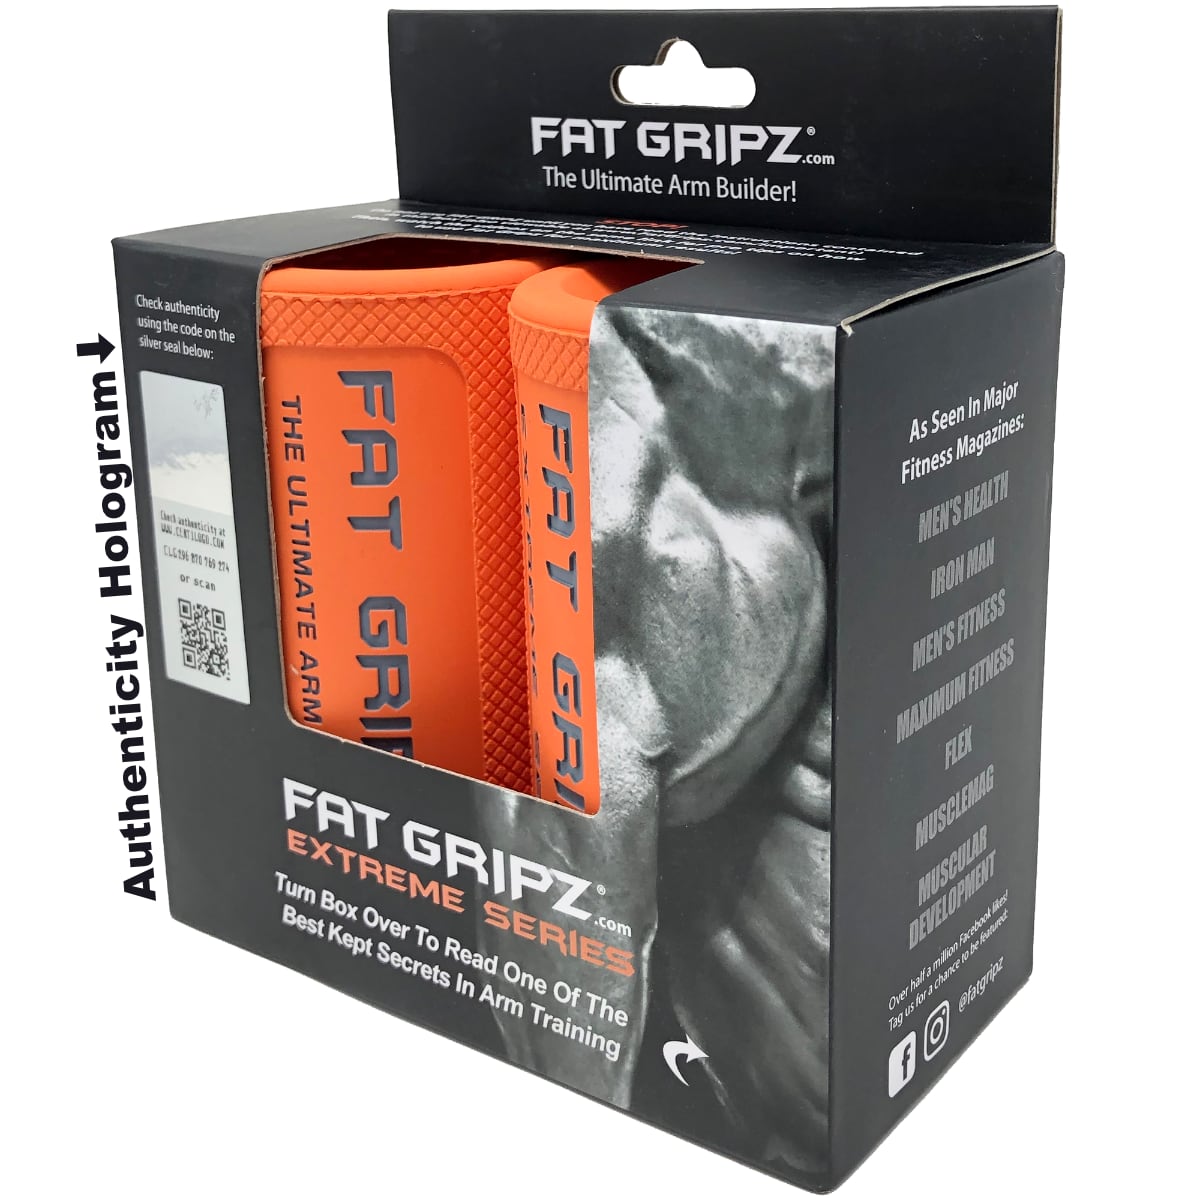 Fat Gripz Extreme Fat Grips ( Weight Grips / Grips For Weight Lifting / Barbell Grips / Dumbbell Grips Thick Grips )